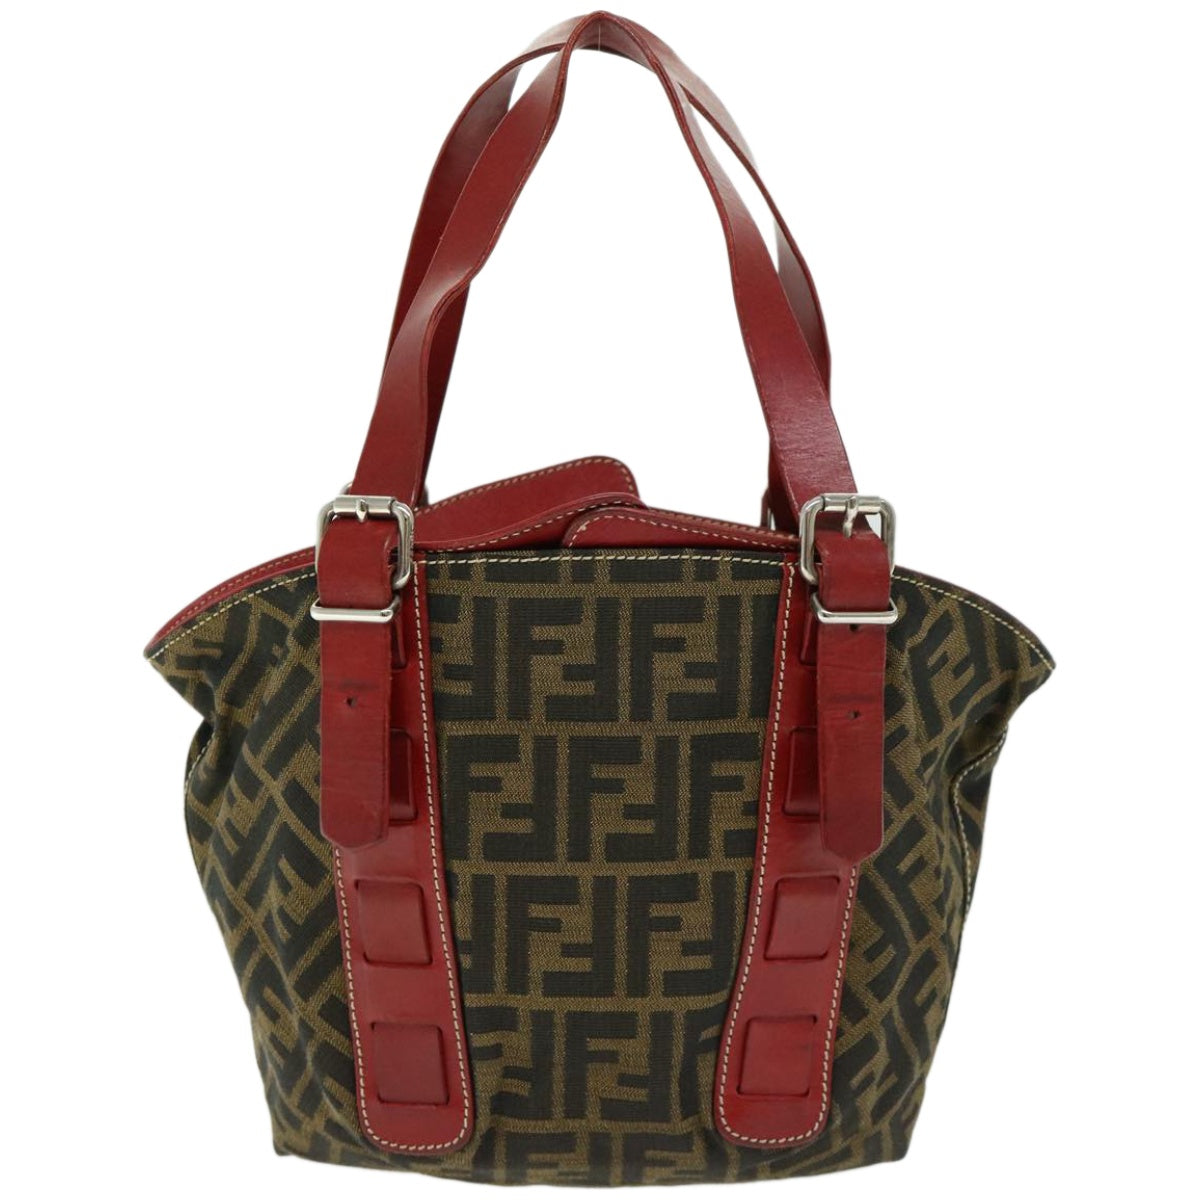 FENDI Zucca Canvas Hand Bag Brown Red Auth 66308